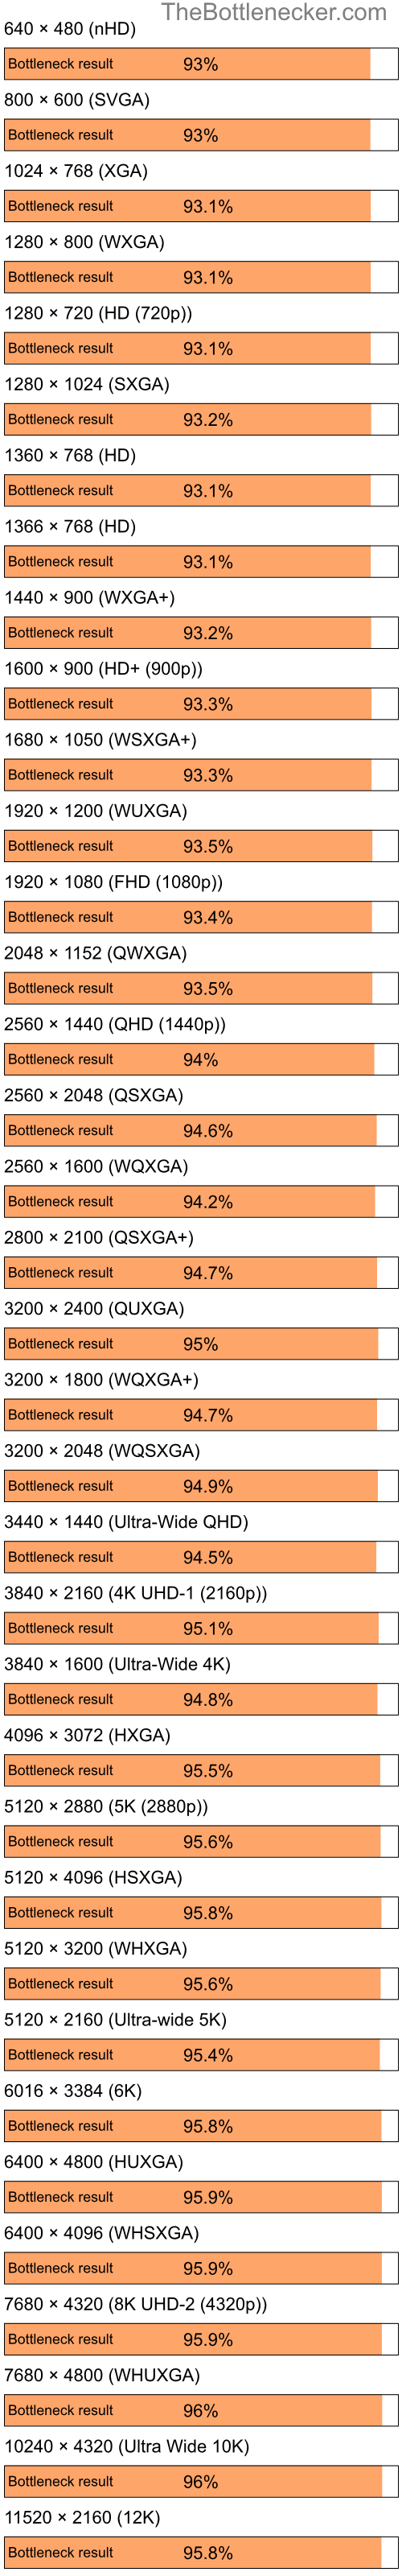 Bottleneck results by resolution for Intel Celeron M 410 and AMD Radeon 9250 in Graphic Card Intense Tasks